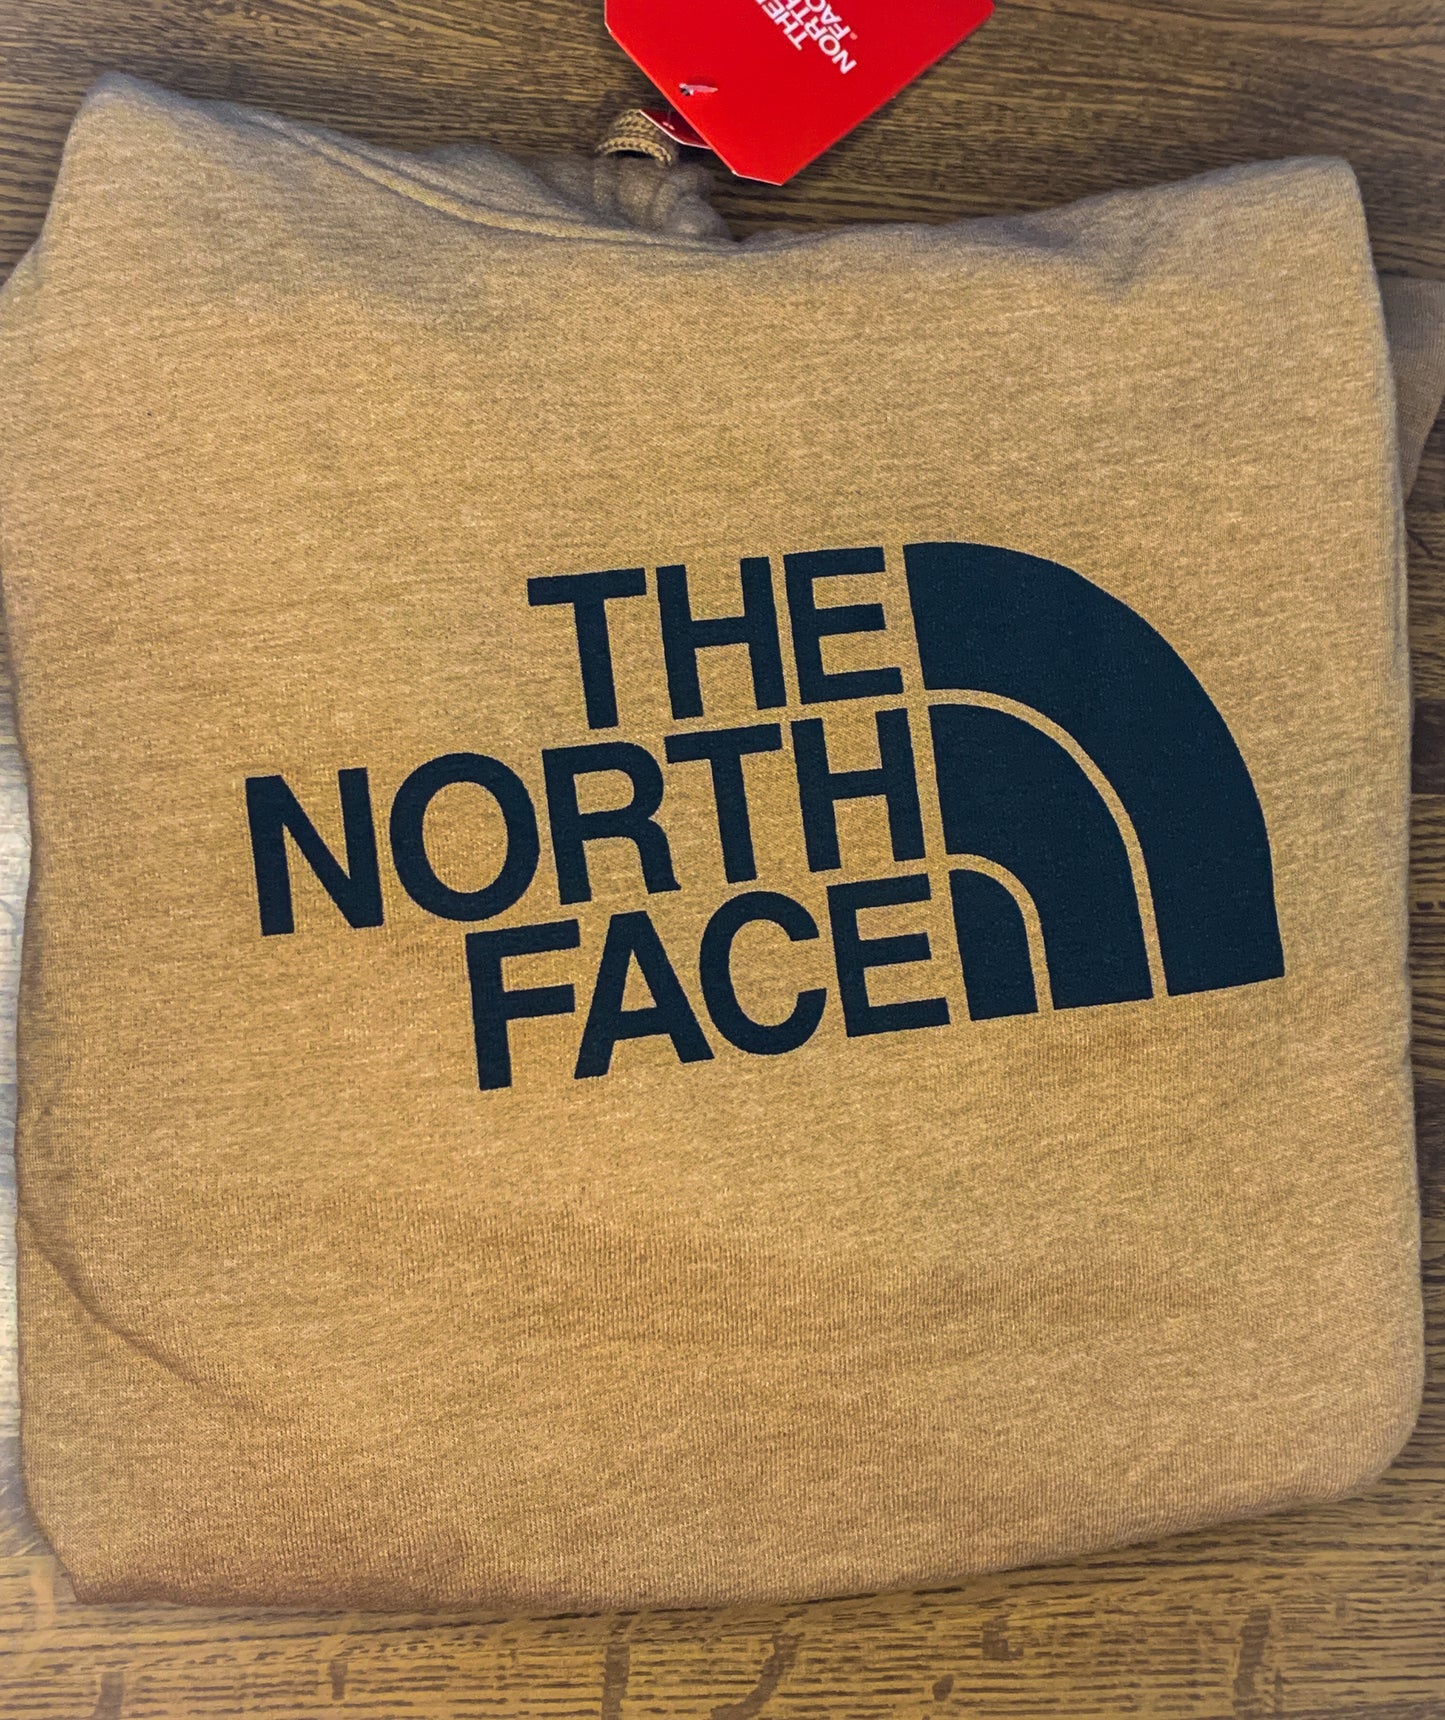 The North Face Men's Half Dome Hoody